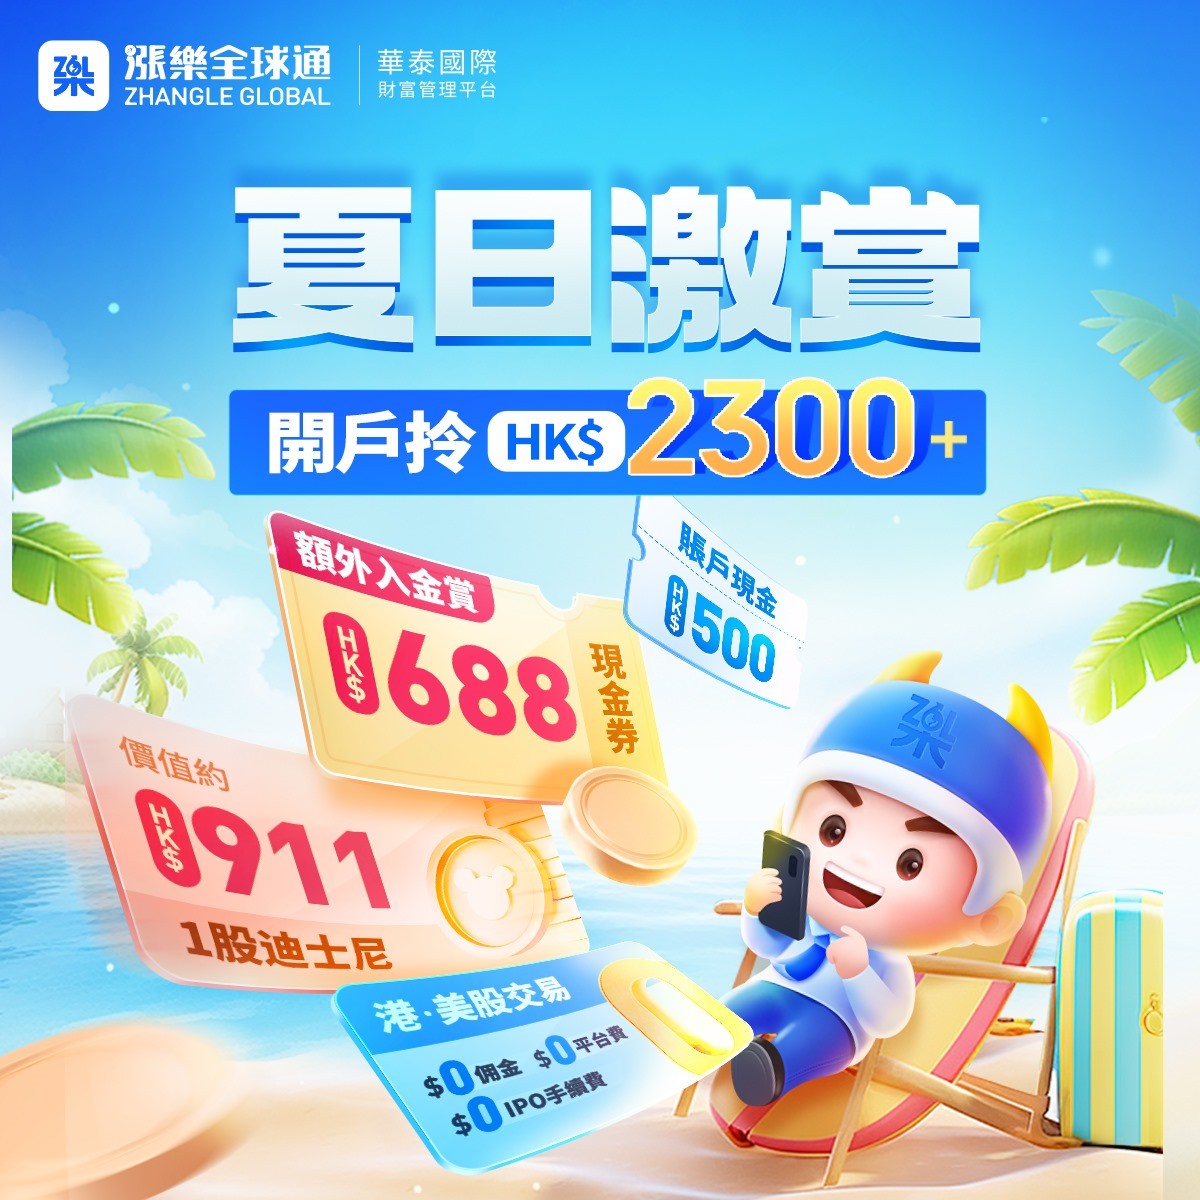 [July] Come On and Get Huatai Summer Bonus up to HK$2300!